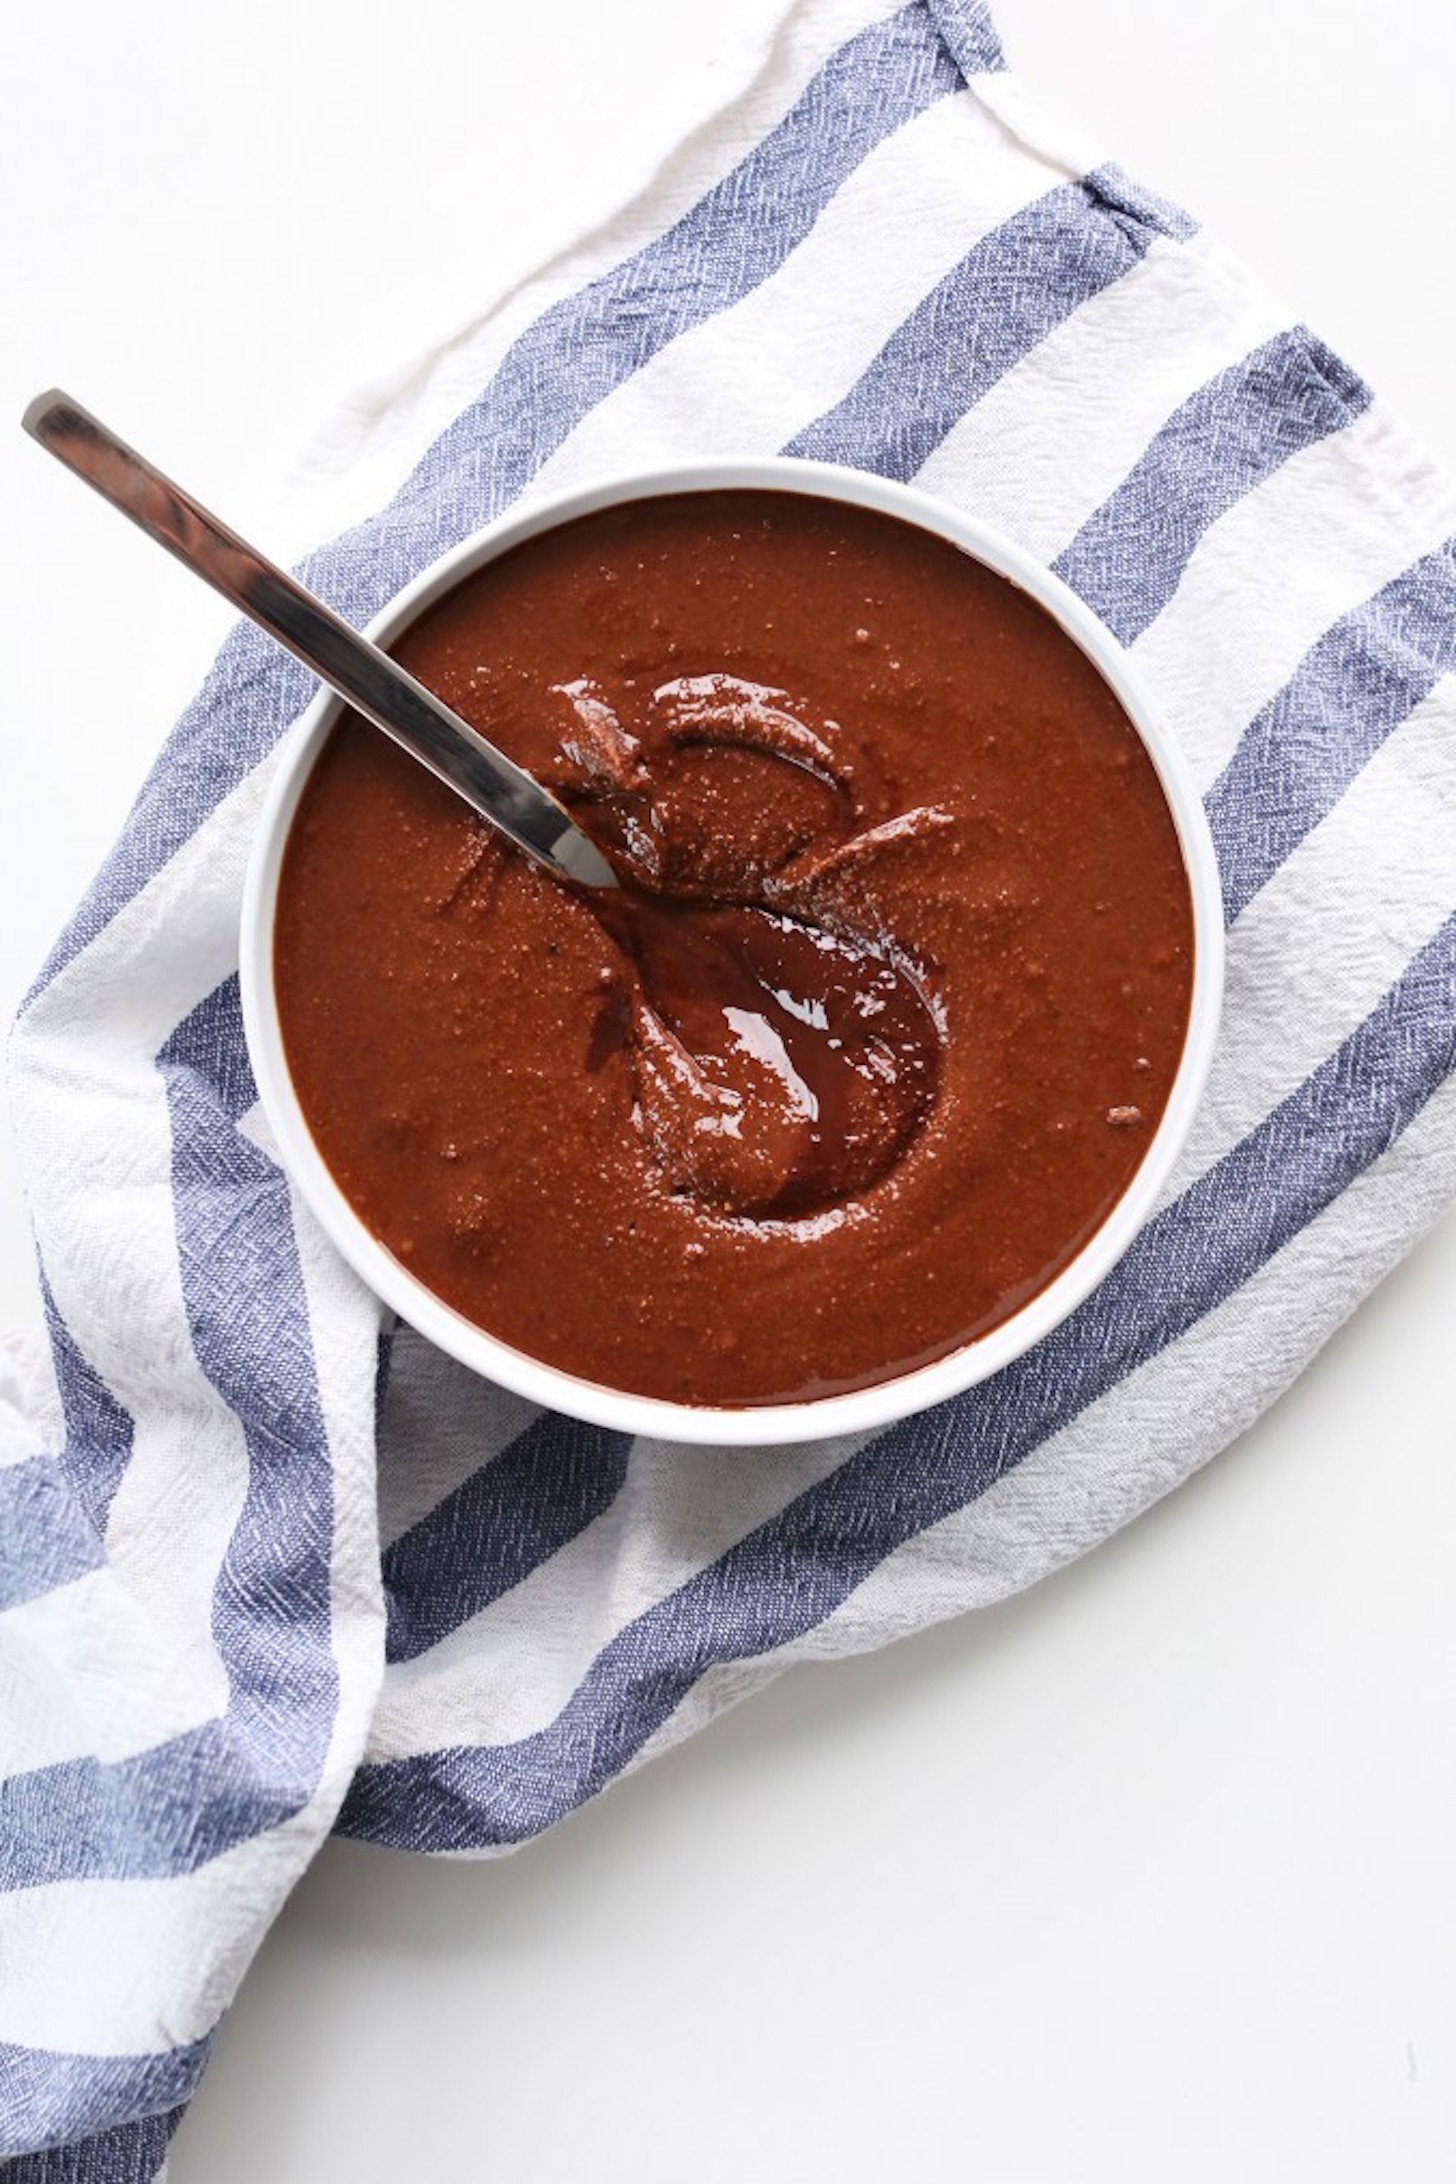 How to Make Nutella {4 Ingredients!} - FeelGoodFoodie